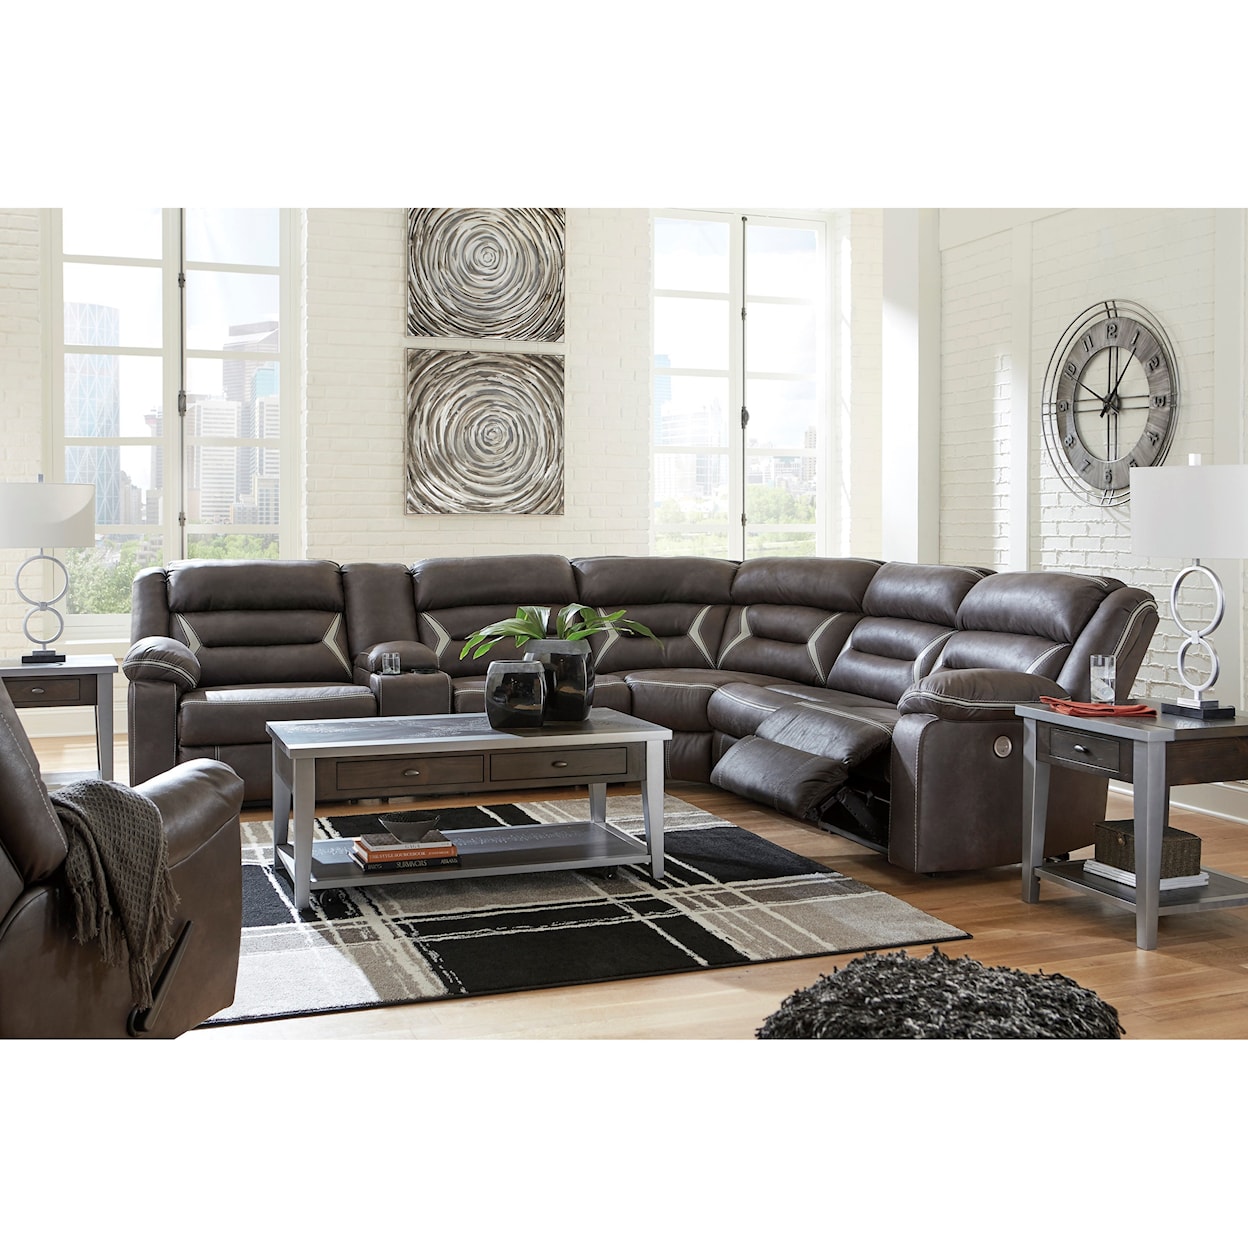 Ashley Furniture Signature Design Kincord Power Reclining Living Room Group